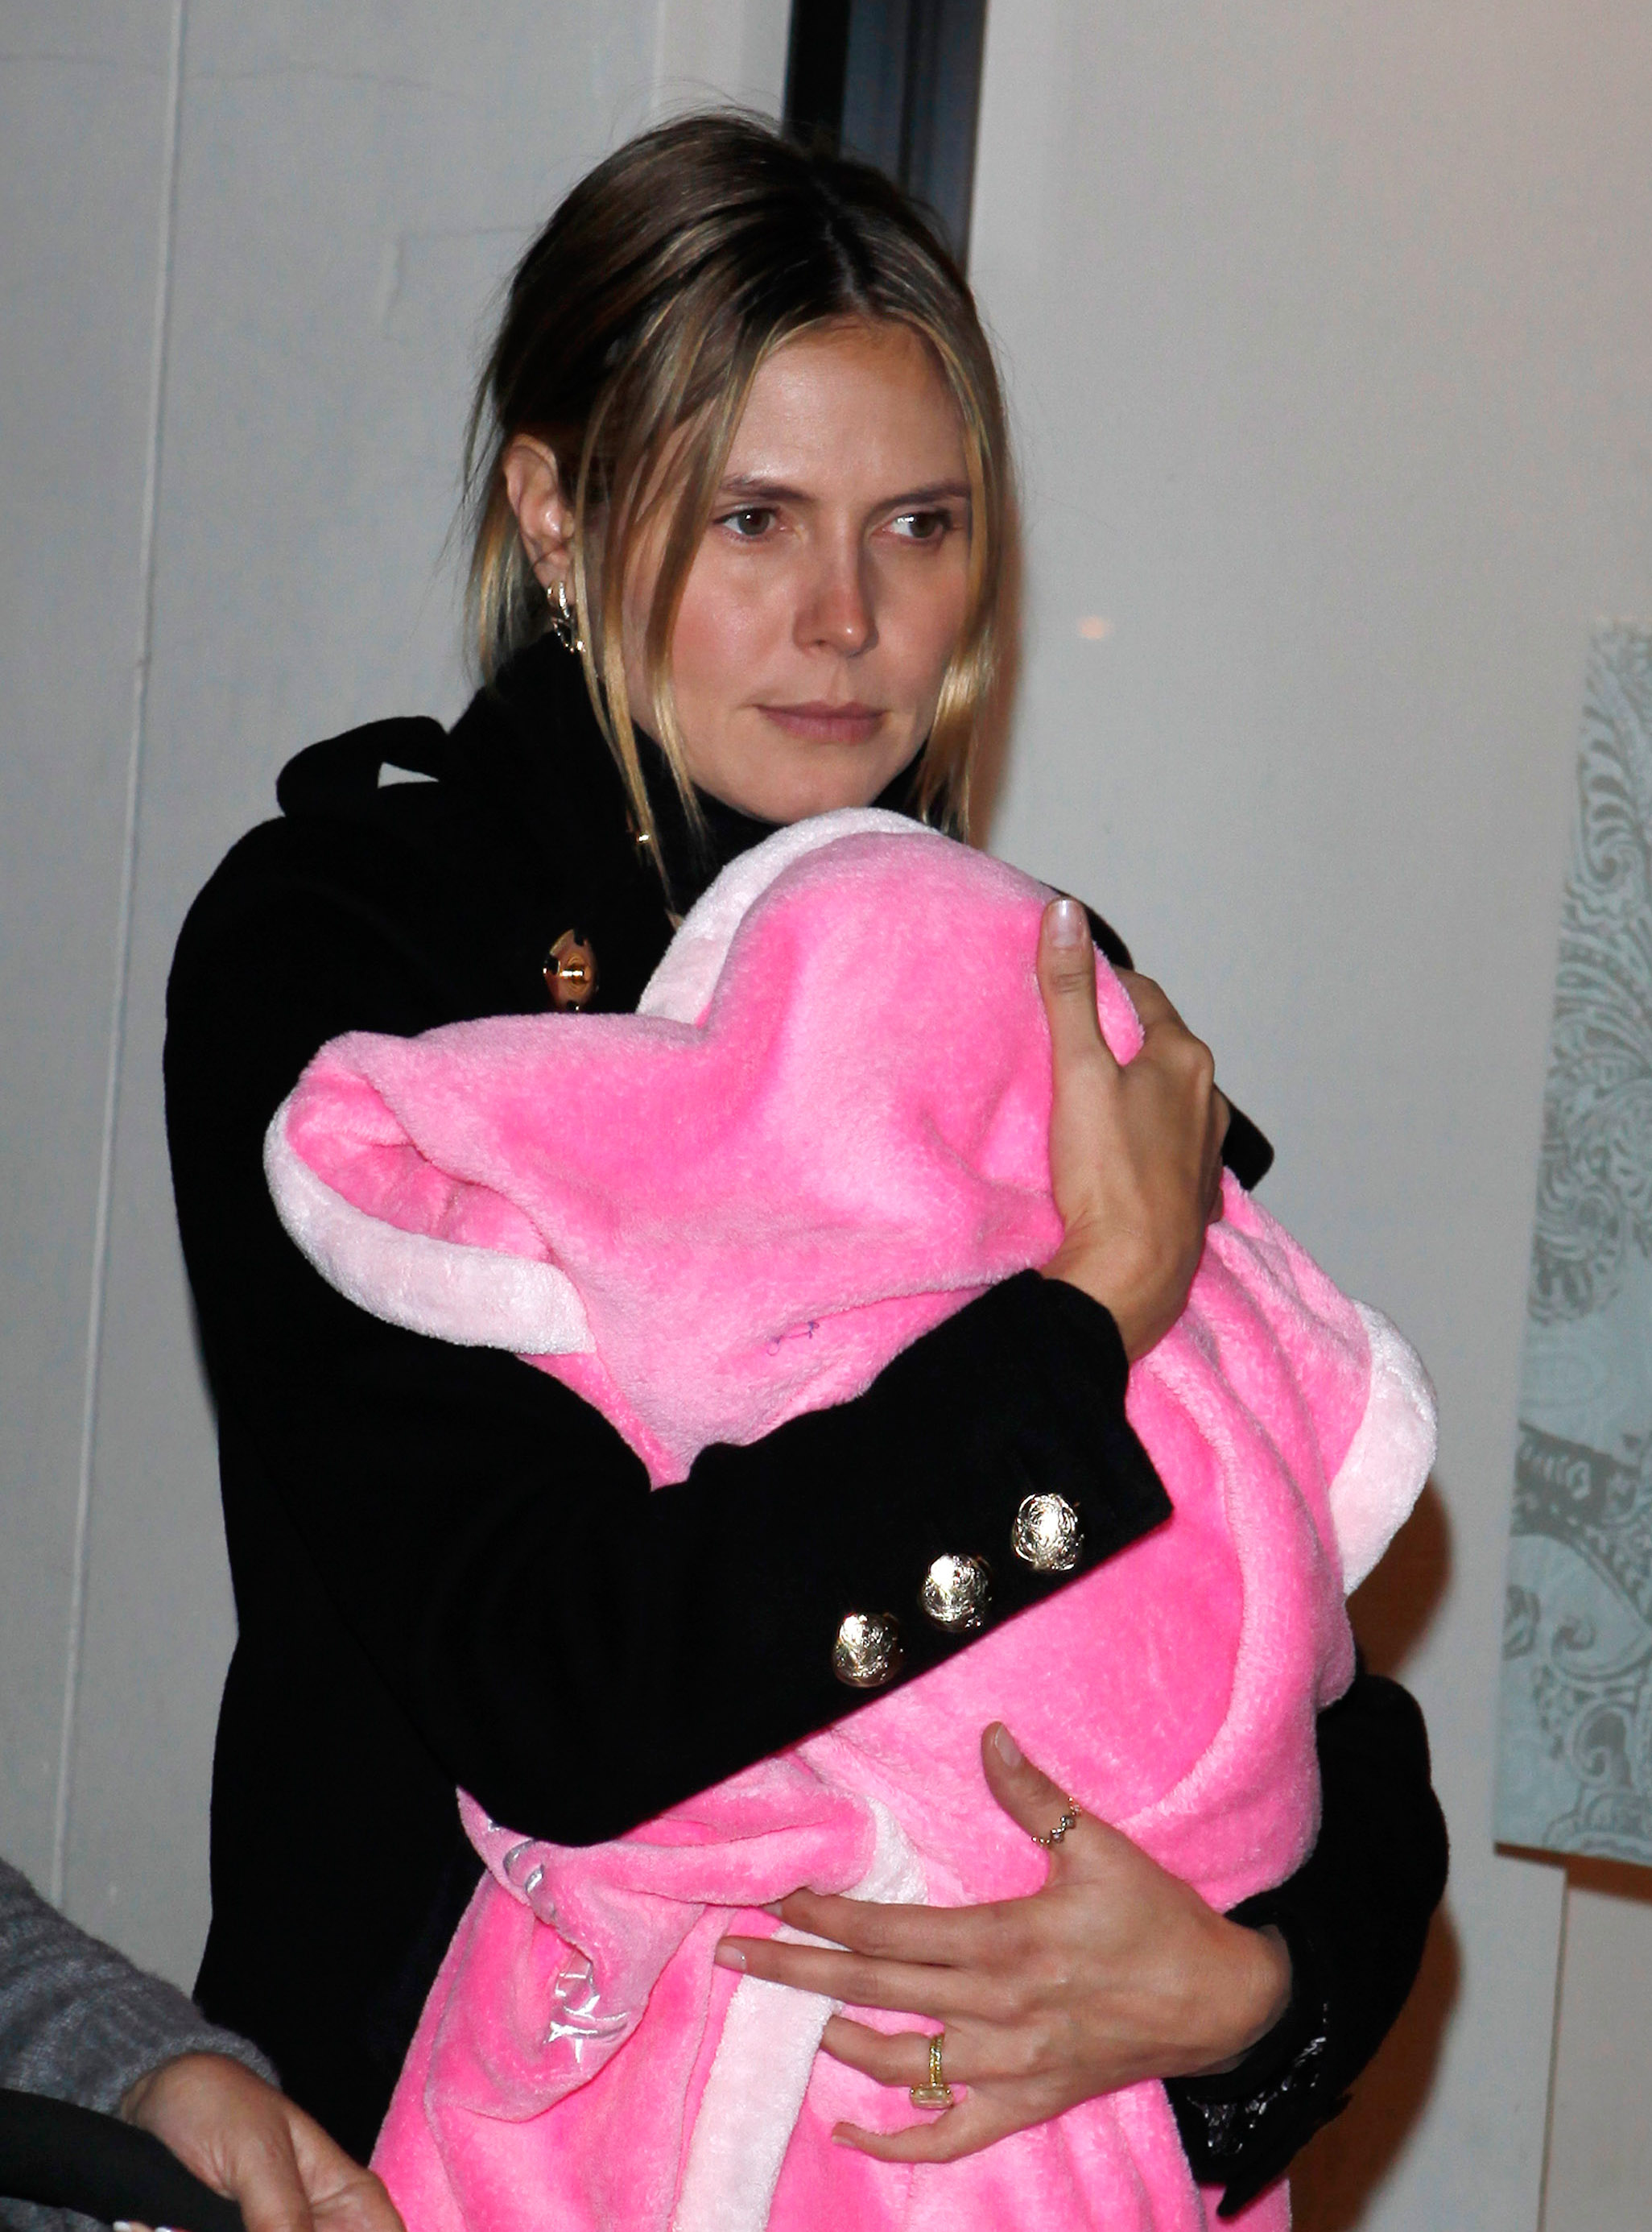 Heidi Klum seen holding her daughter Lou Samuel in Los Angeles on December 6, 2009. | Source: Getty Images